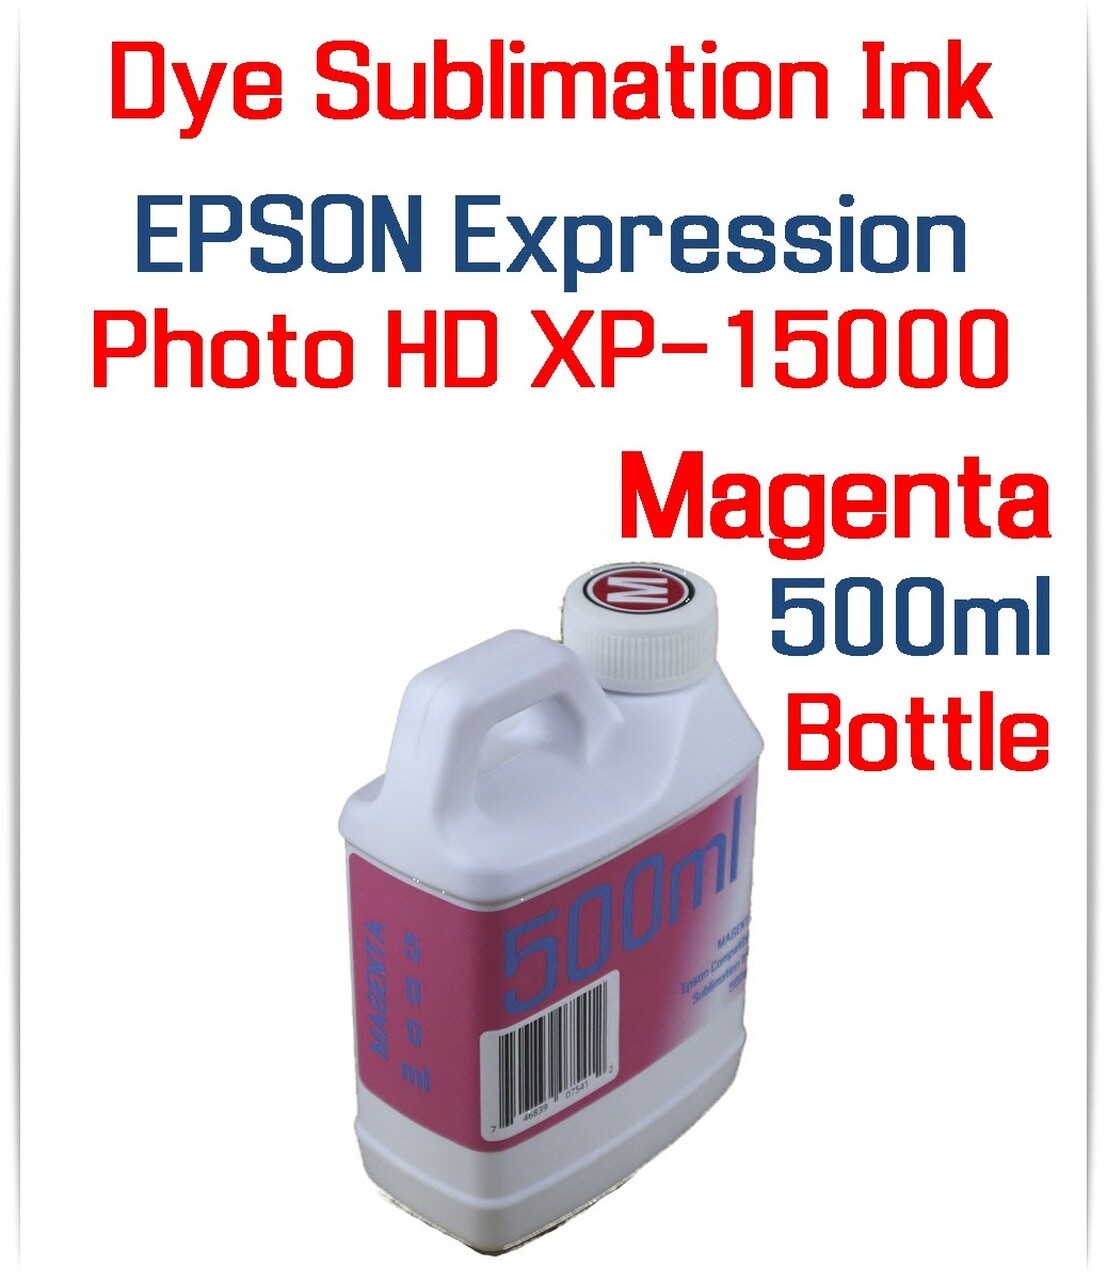 Magenta Dye Sublimation Ink 500ml for Epson Expression Photo HD XP-15000 printer